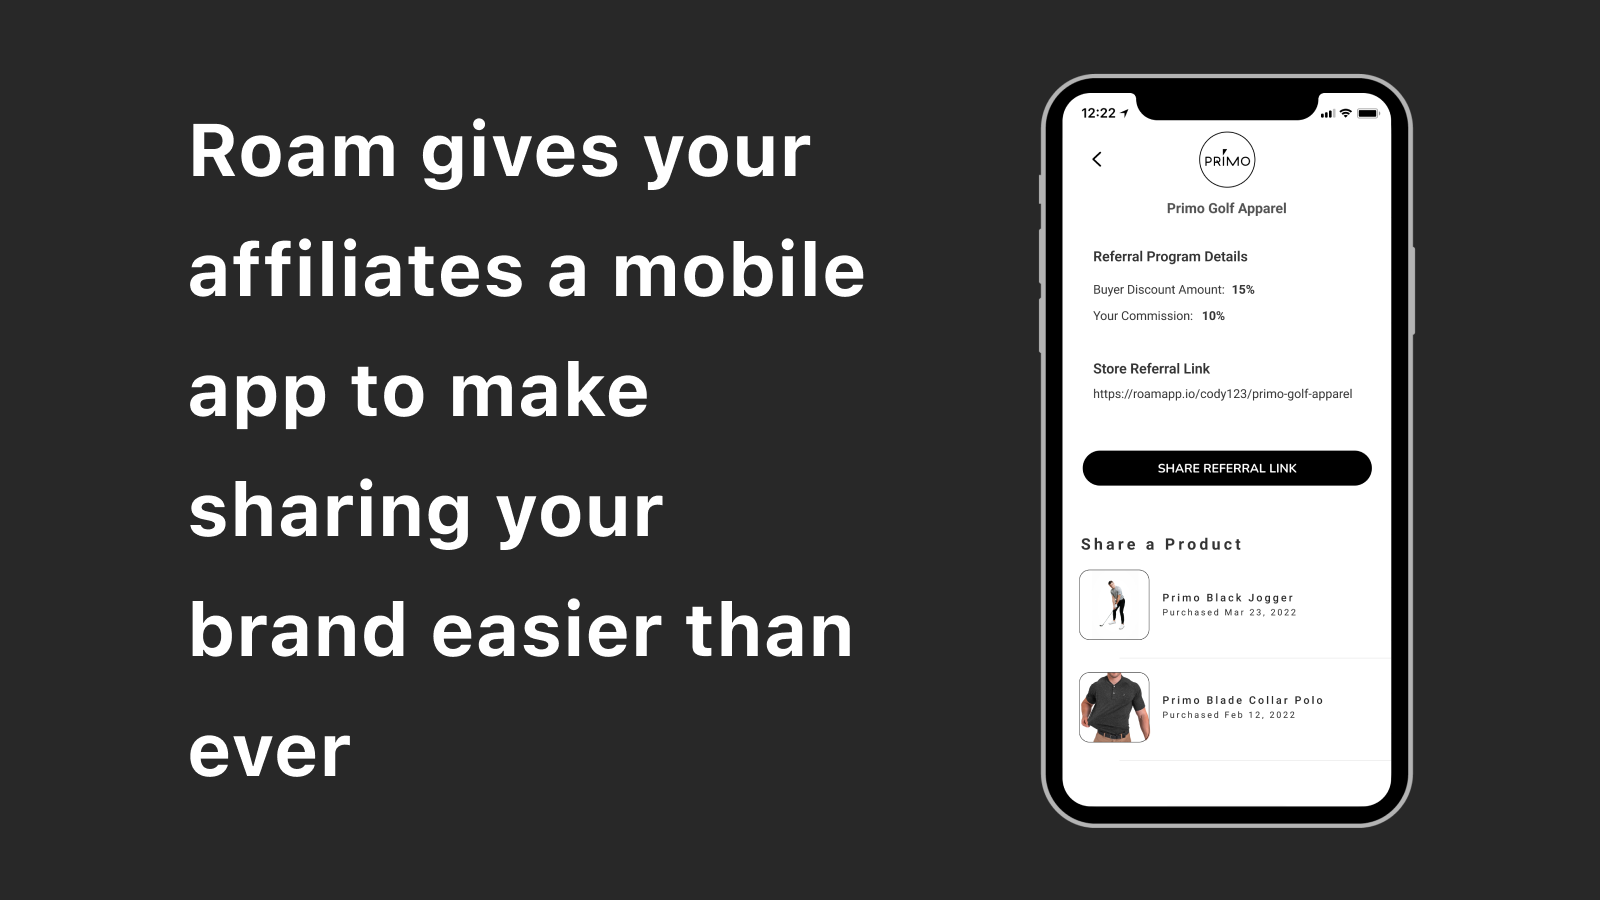 Give affiliates a mobile app